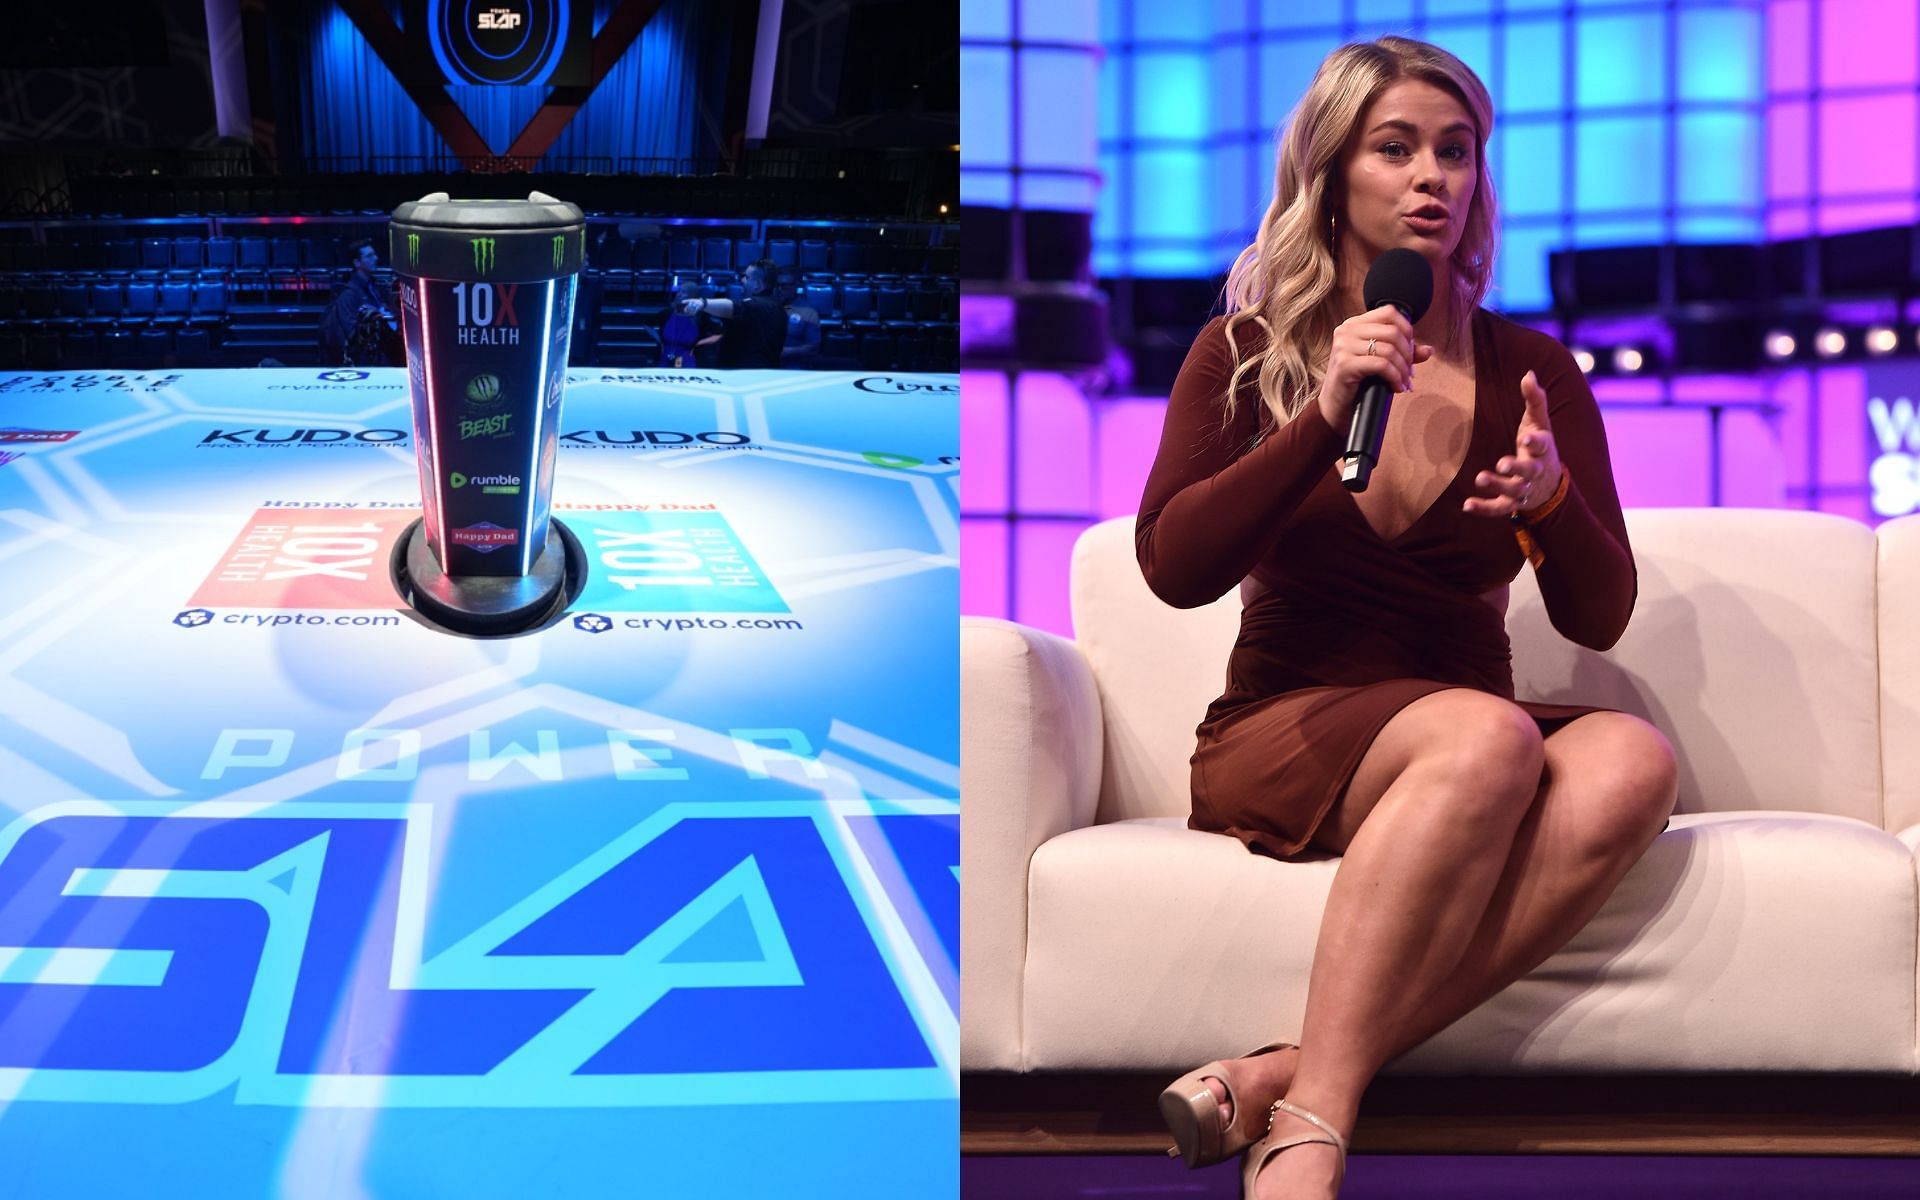 The Power Slap ring (left) could soon play host to former UFC star Paige VanZant (right) [Images courtesy: Power Slap and Getty Images]